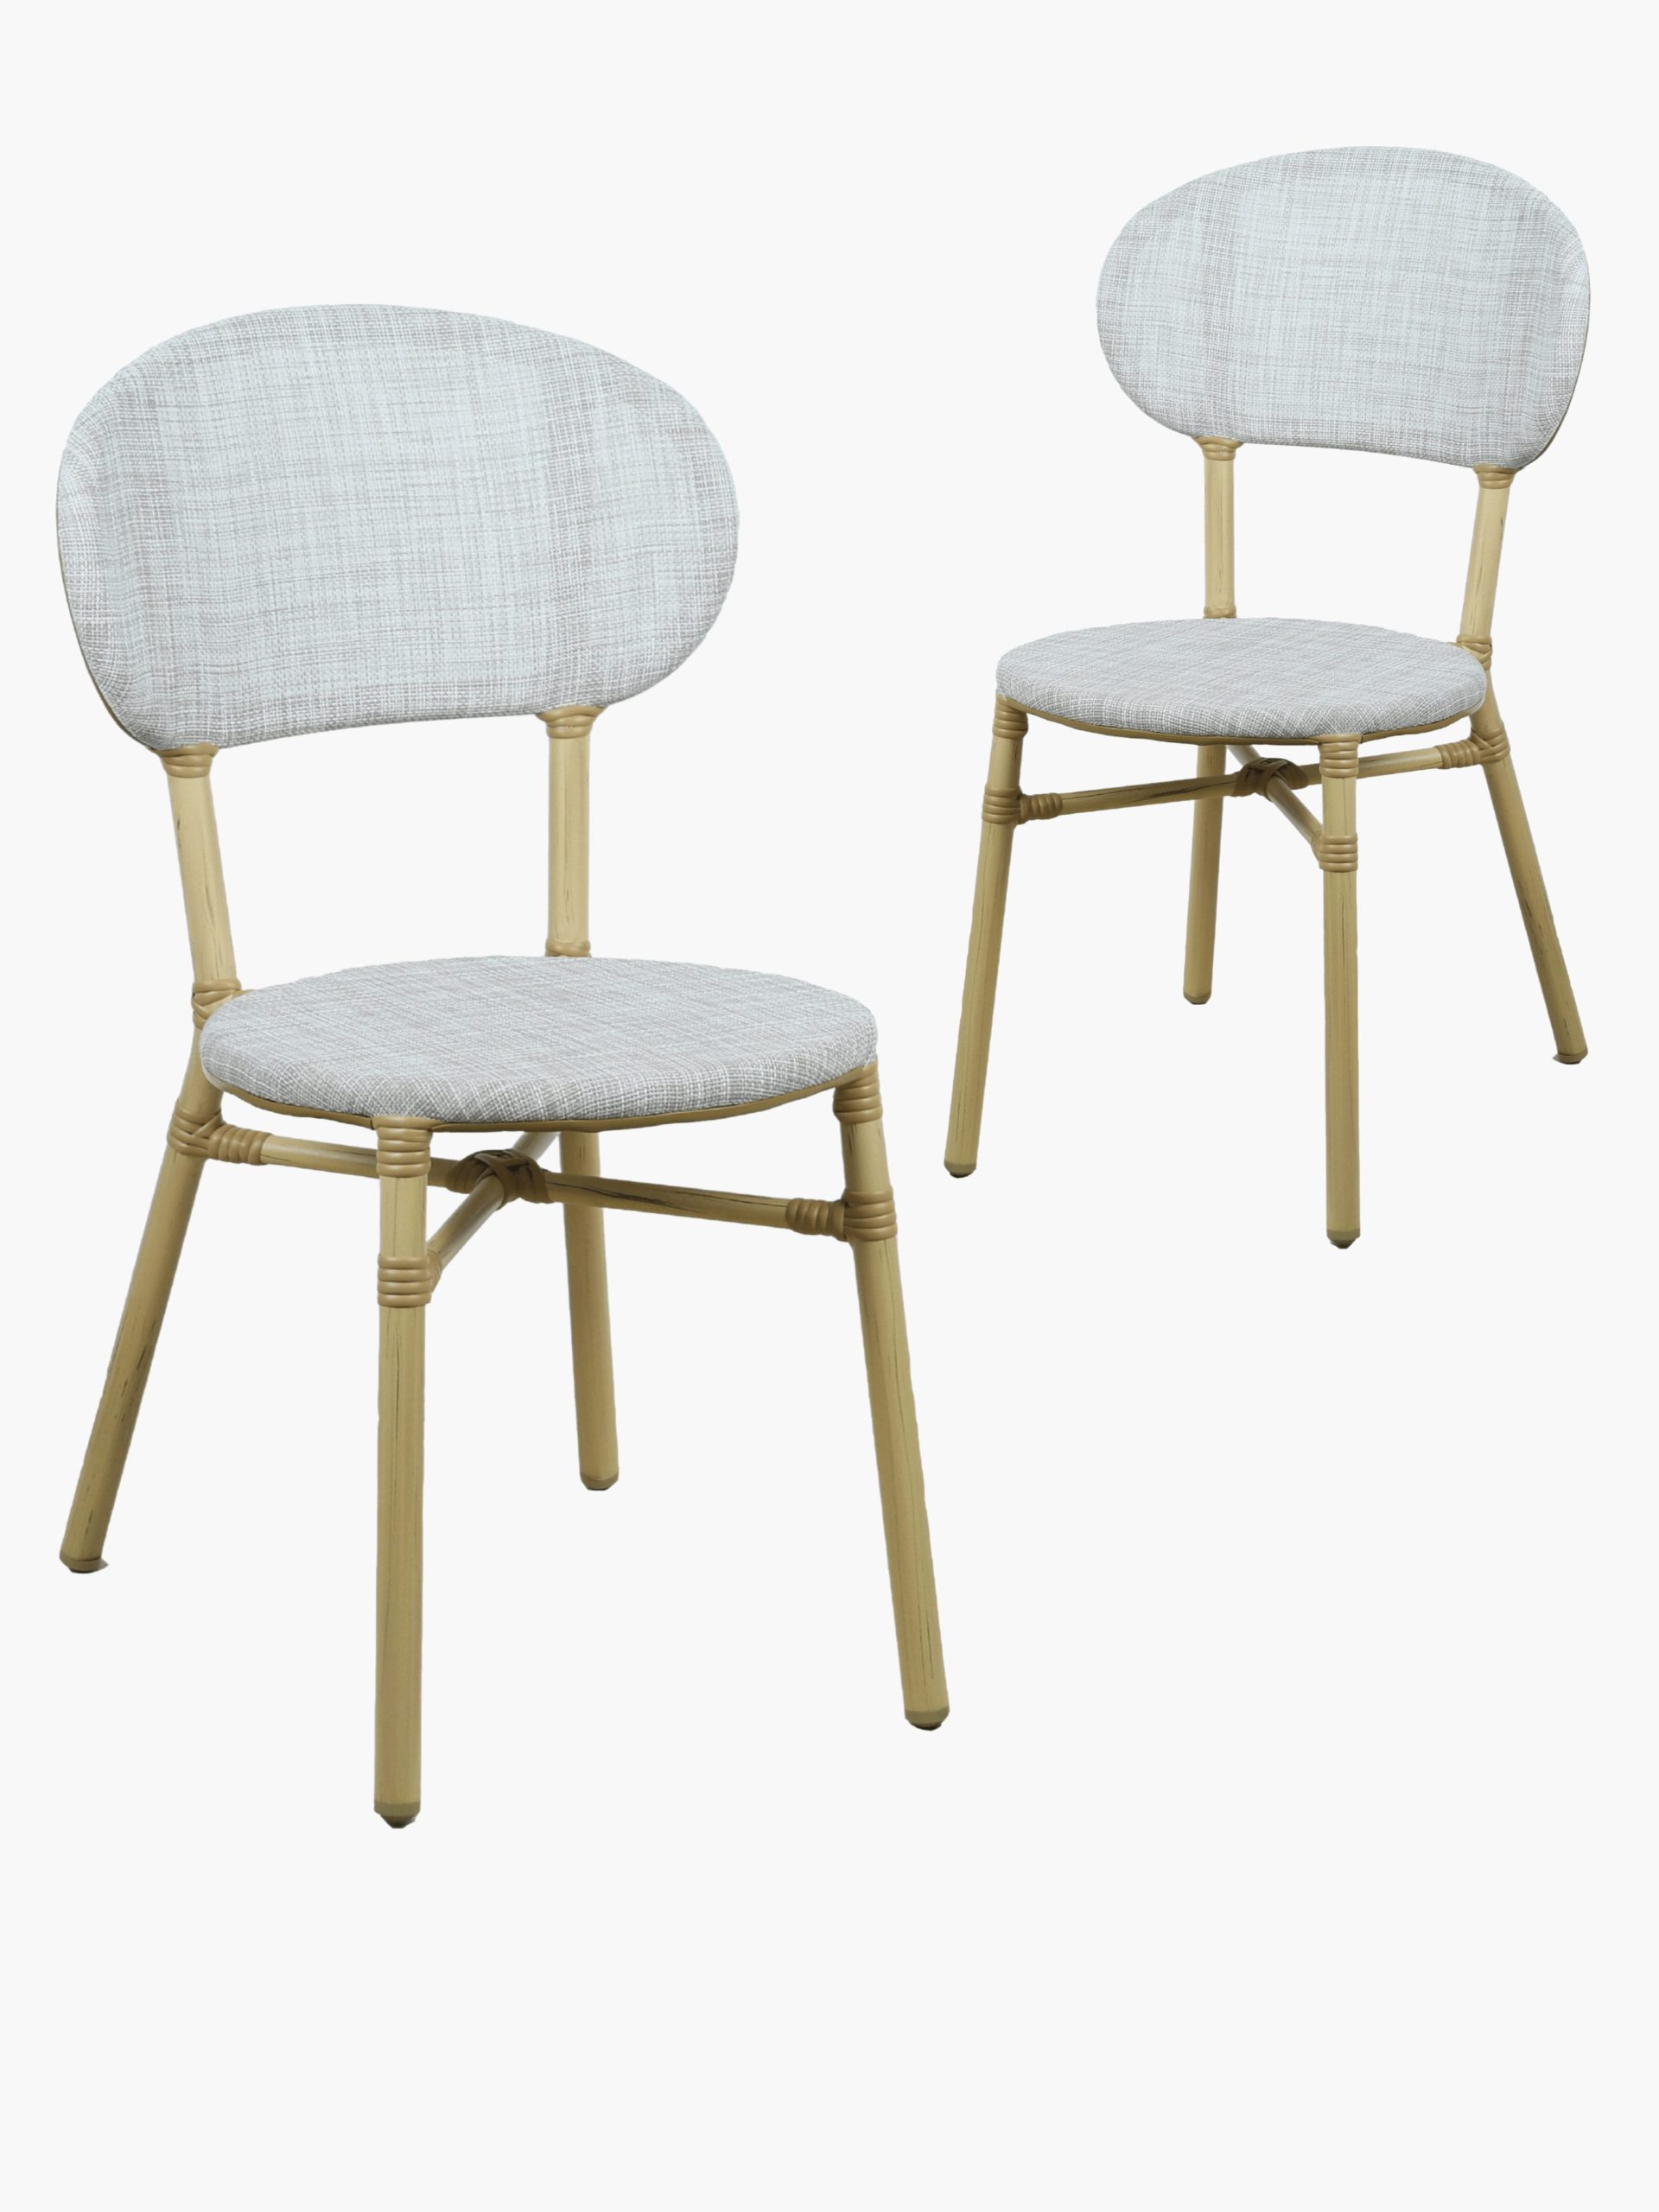 Buy Malta Outdoor Dining Chair Set of Two Online Australia